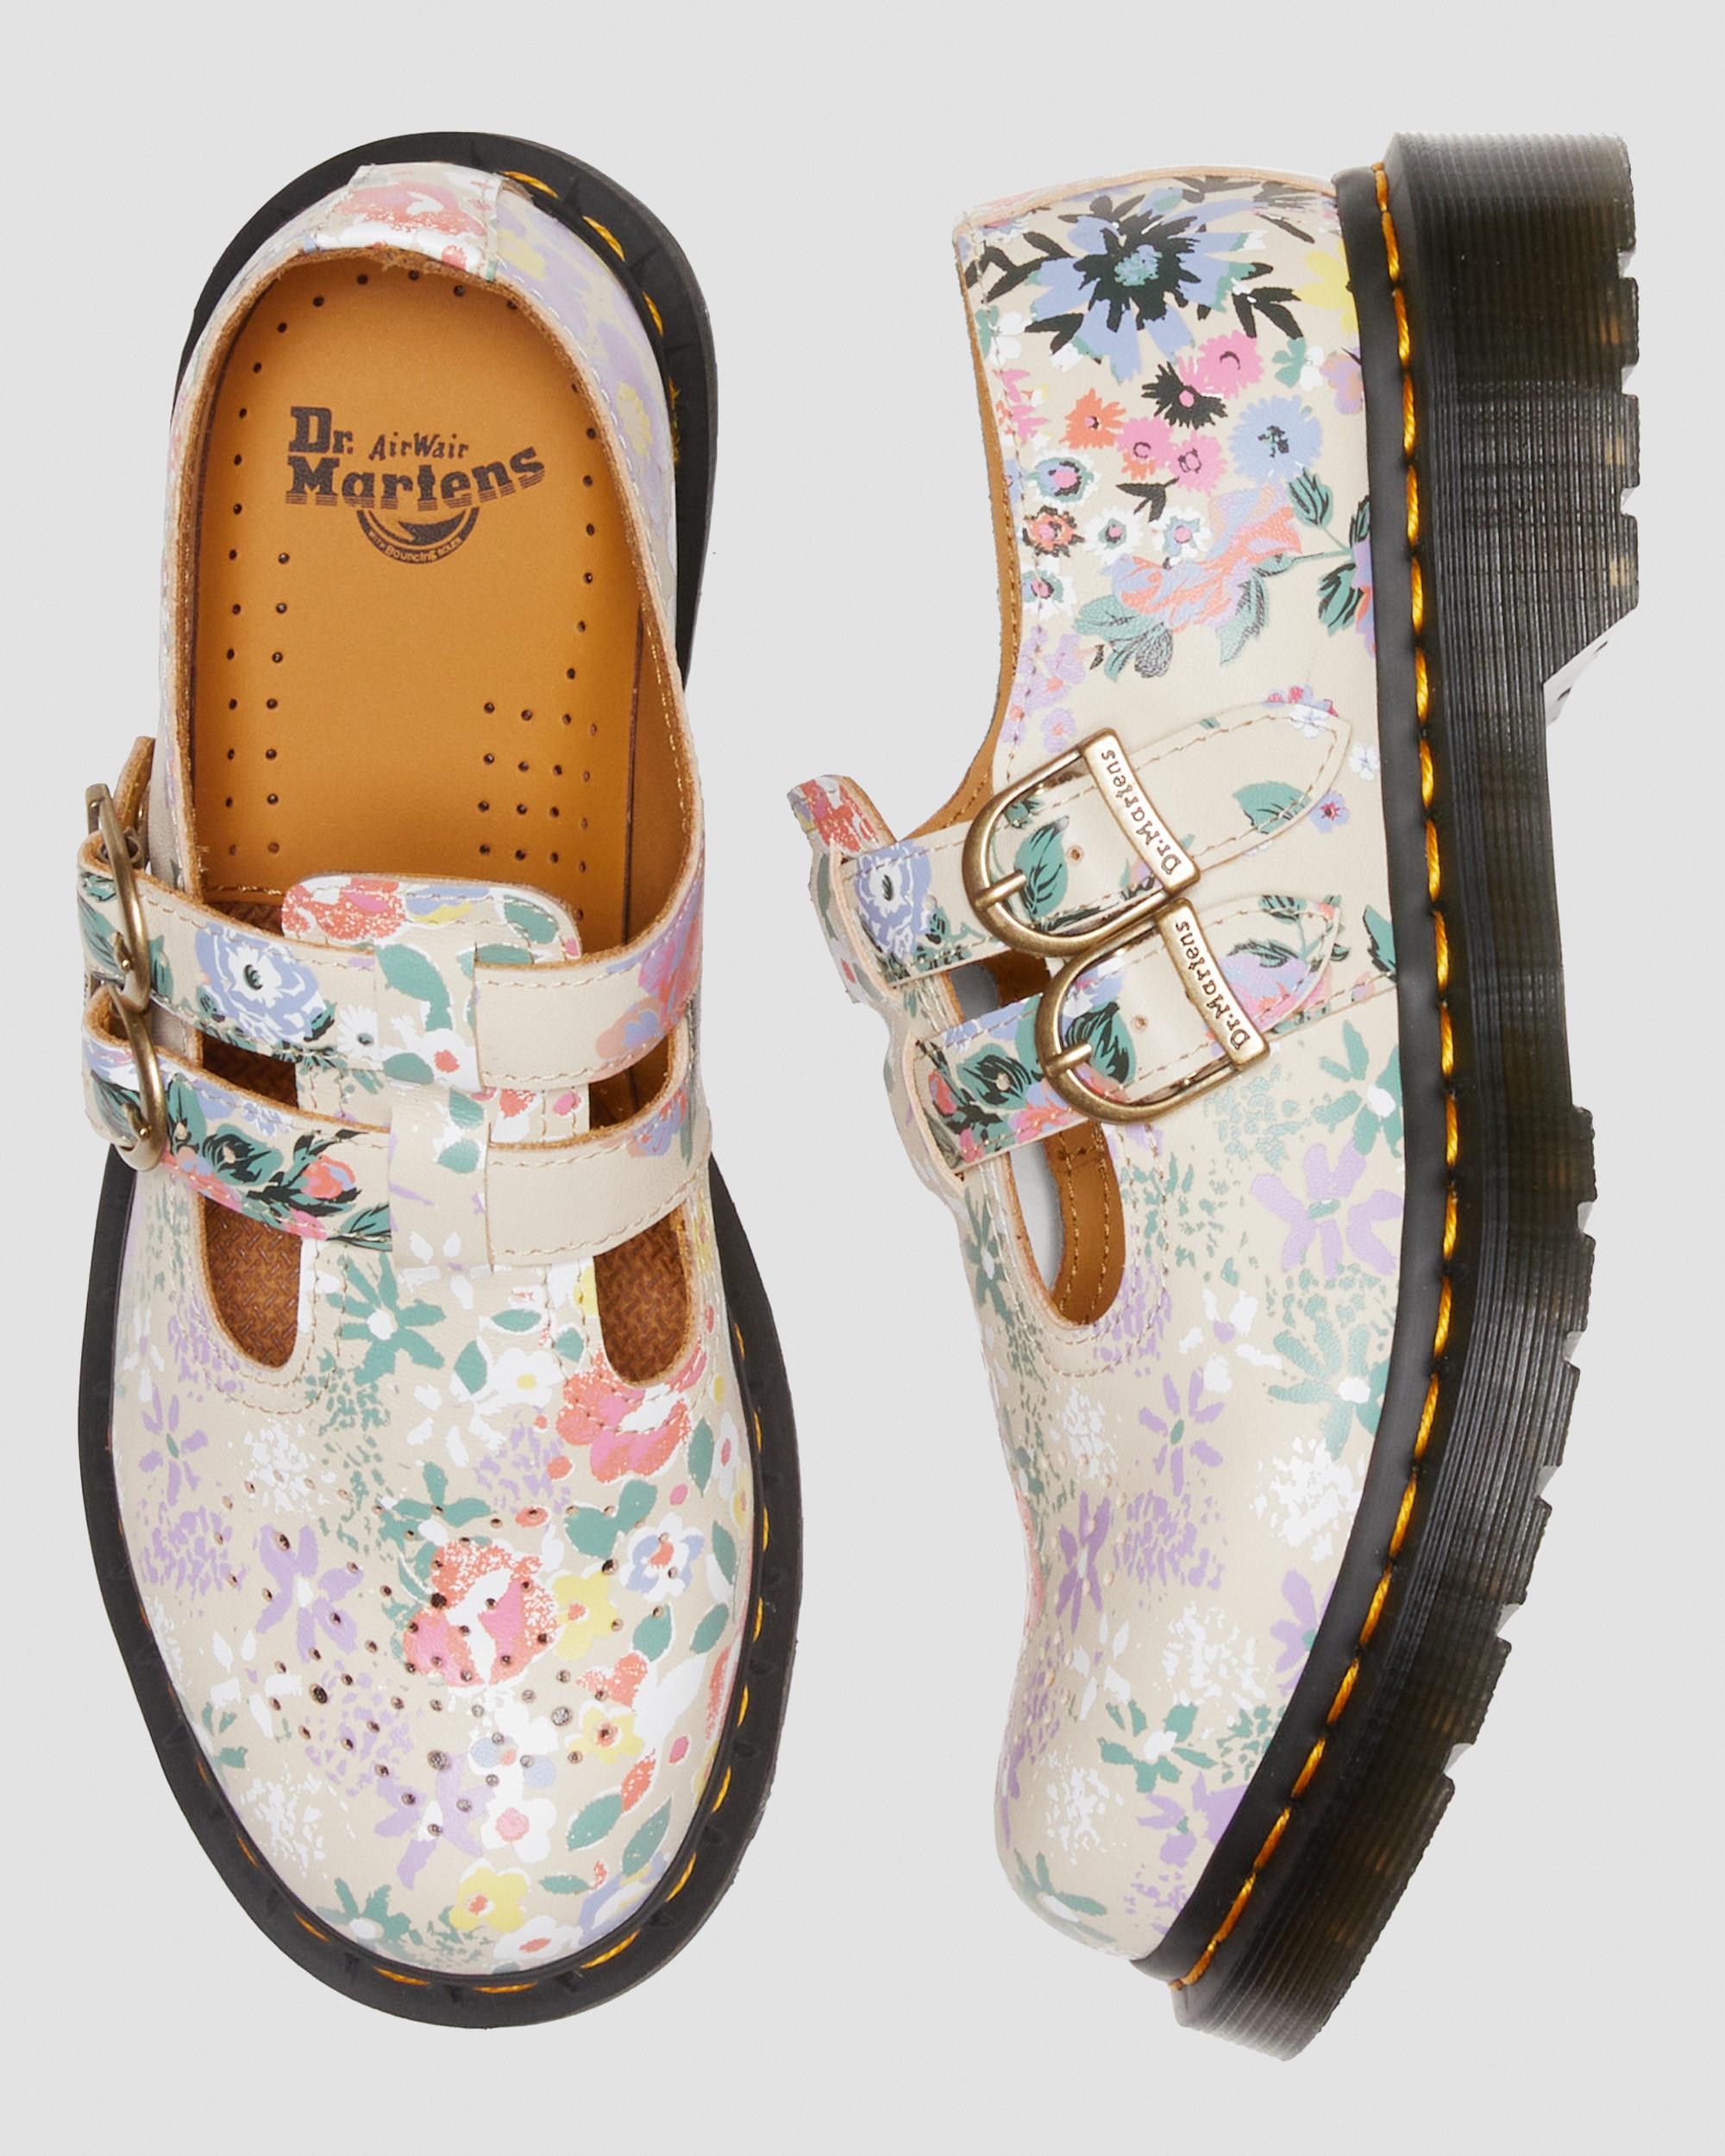 8065 Floral Mash Up Leather Mary Jane Shoes in Parchment Beige | Dr. Martens